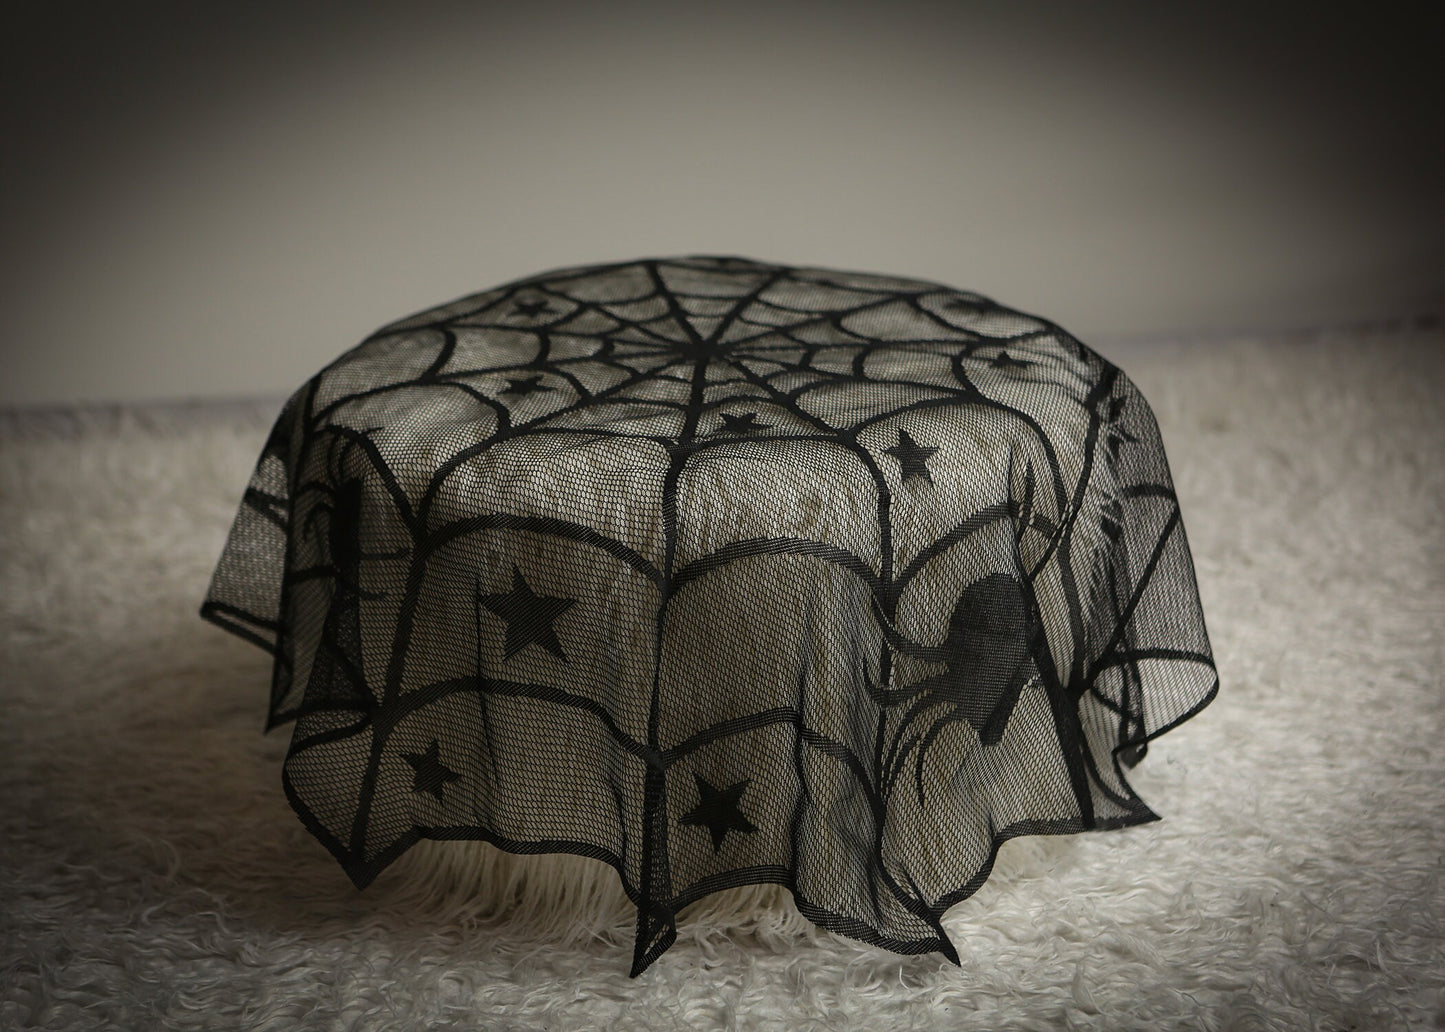 Lace Spider Web Table Cloth